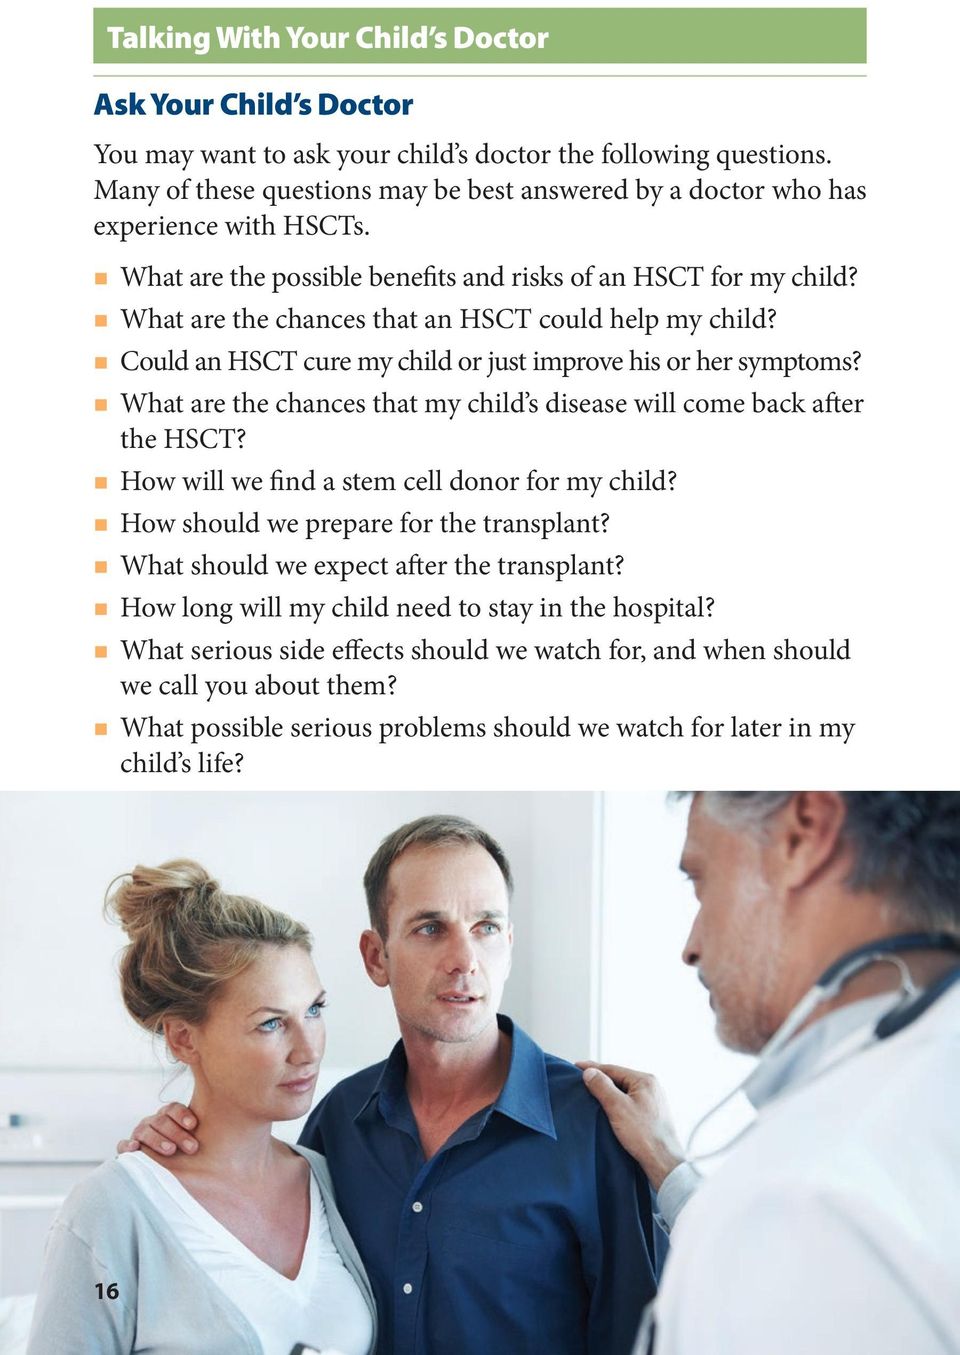 What are the chances that an HSCT could help my child? Could an HSCT cure my child or just improve his or her symptoms? What are the chances that my child s disease will come back after the HSCT?